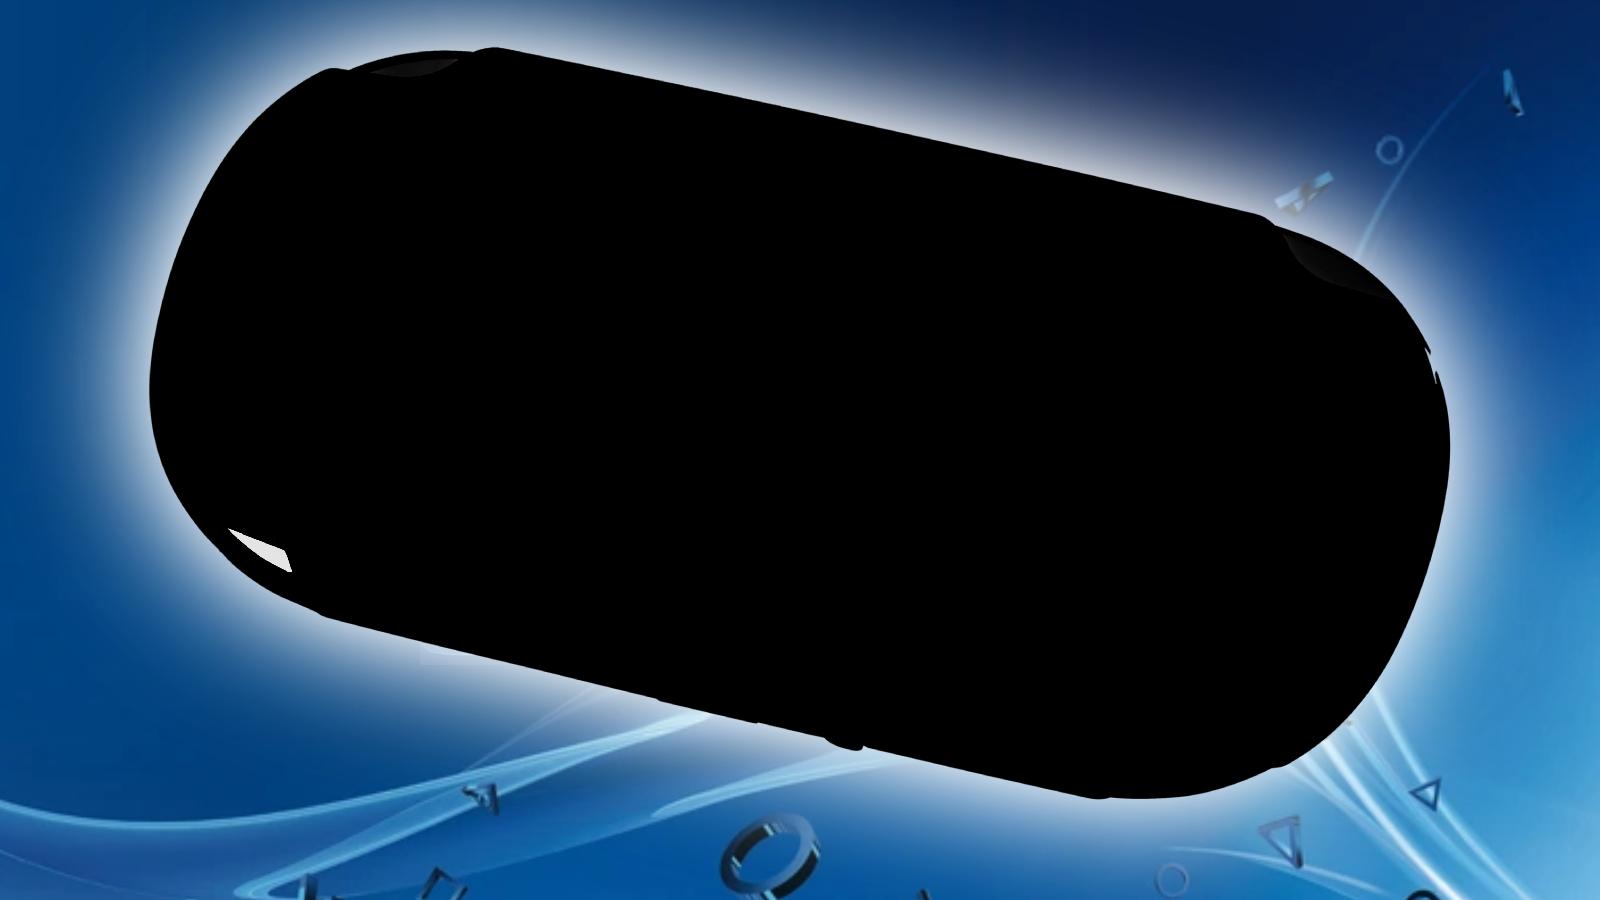 PlayStation Vita silhouette with outer glow on PlayStation Blue background wiith controller symbols